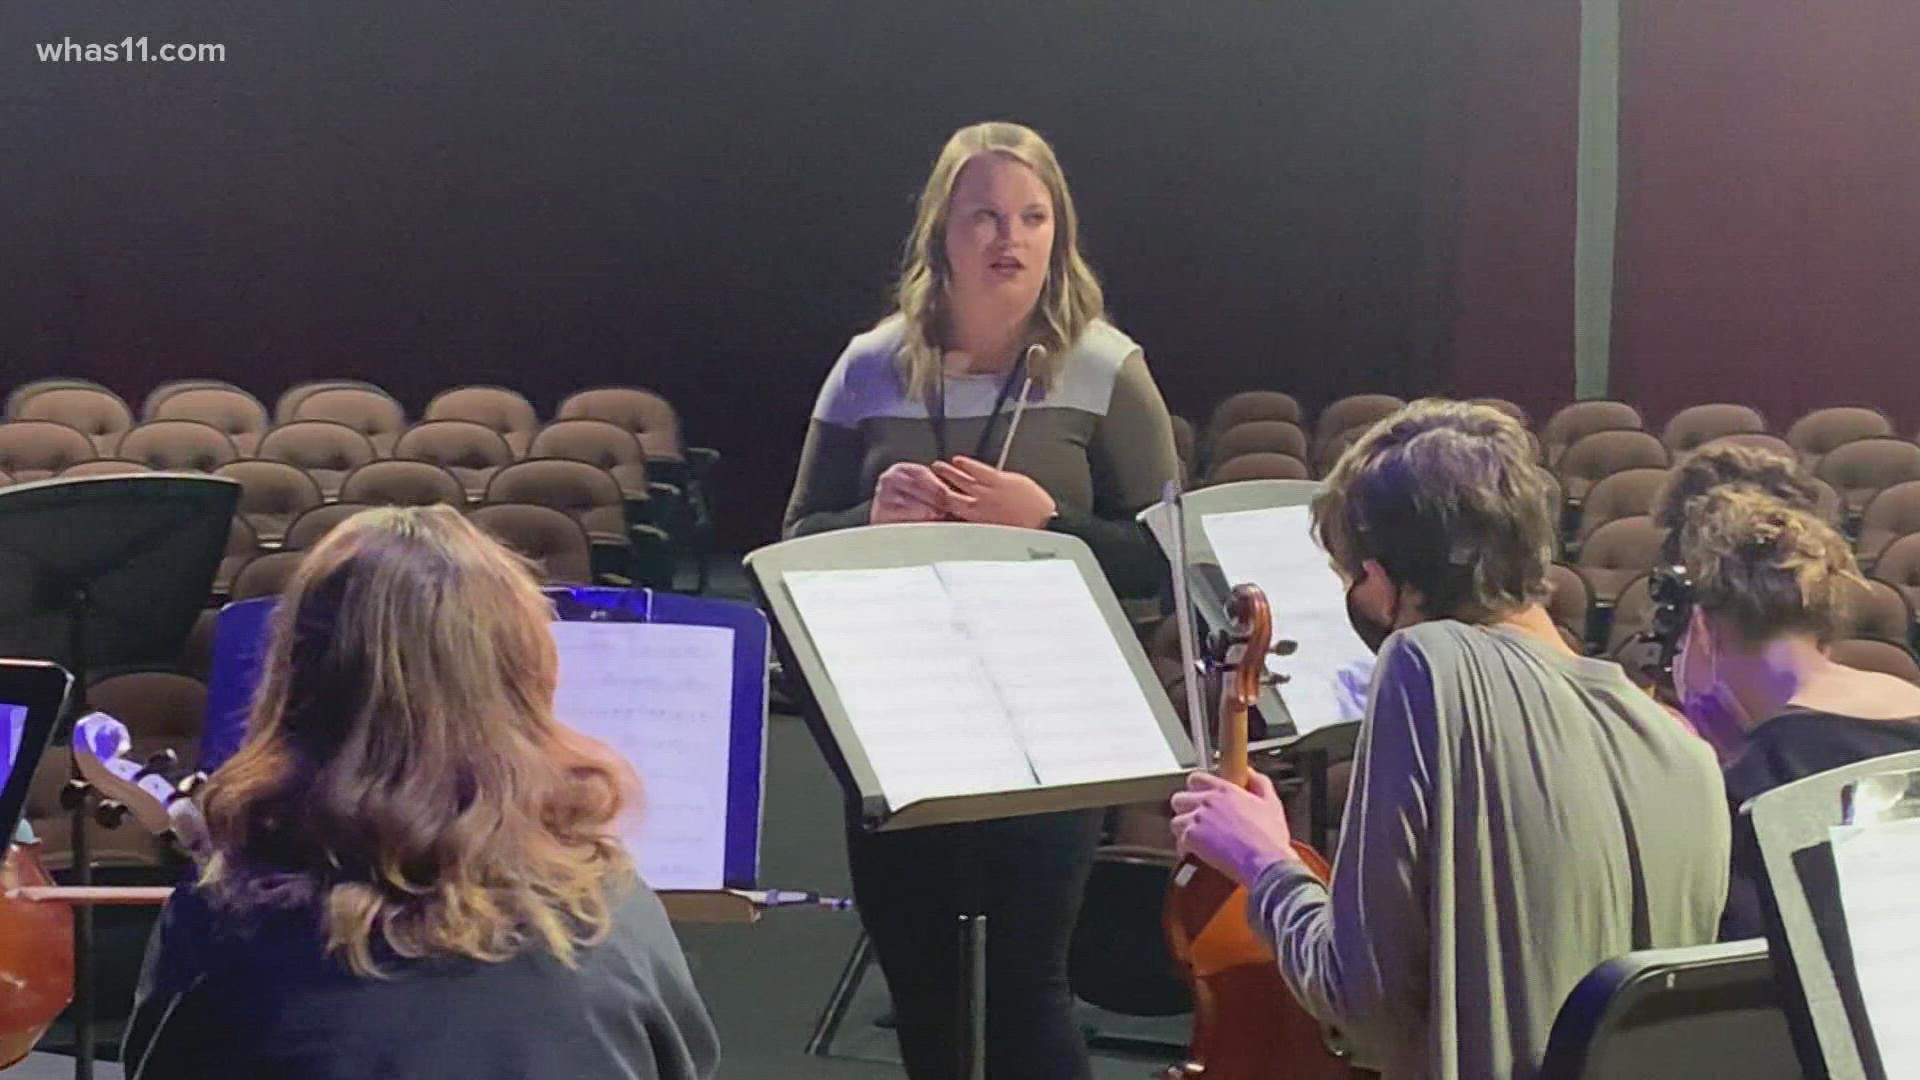 Emily Gallagher knows how important music is in her students' lives.